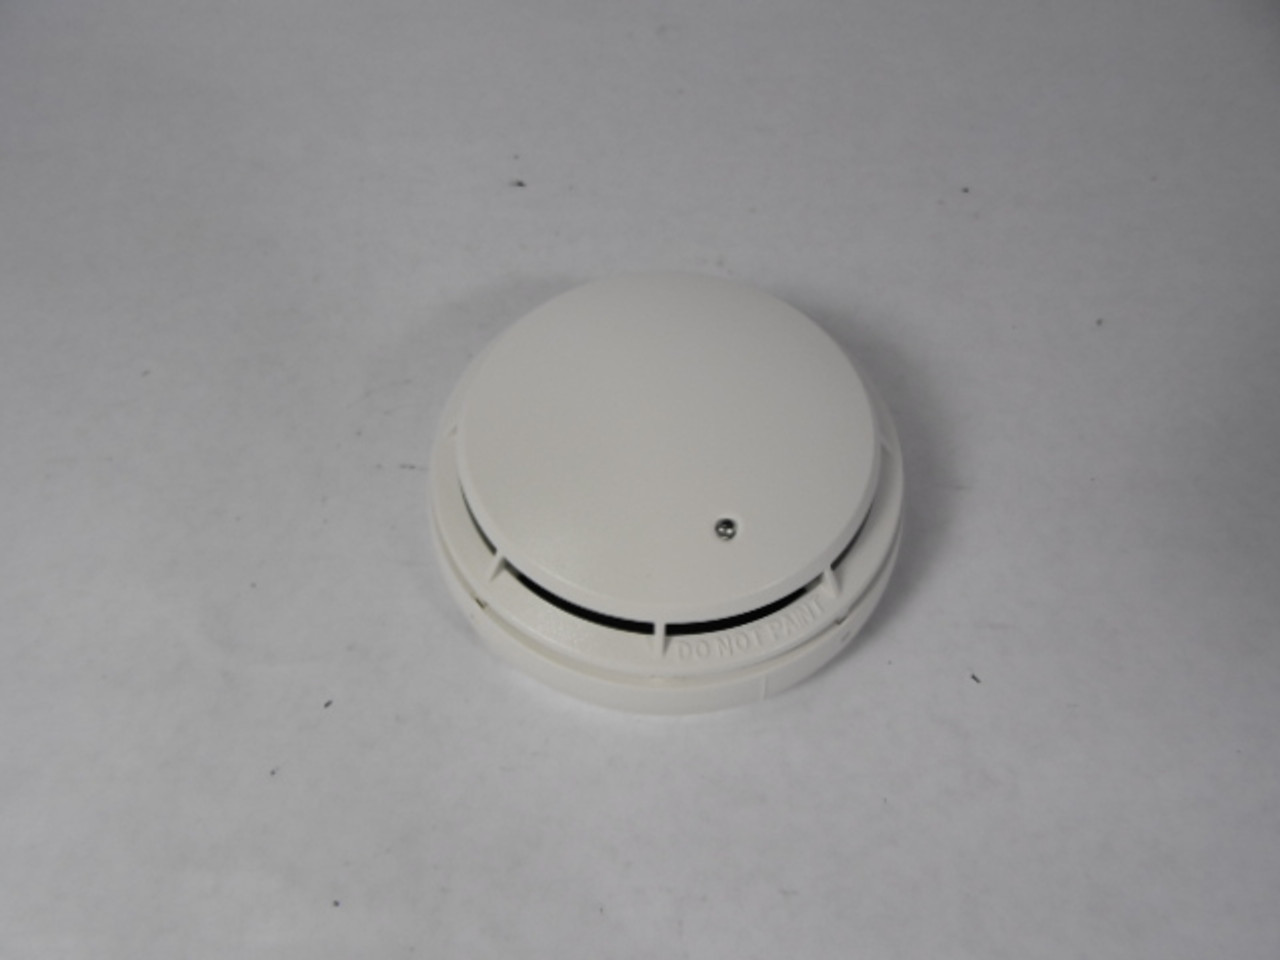 Tyco 4098-9601 Smoke Detector 15-32 VDC 0-2000 FT/Min Without Base ! AS IS !